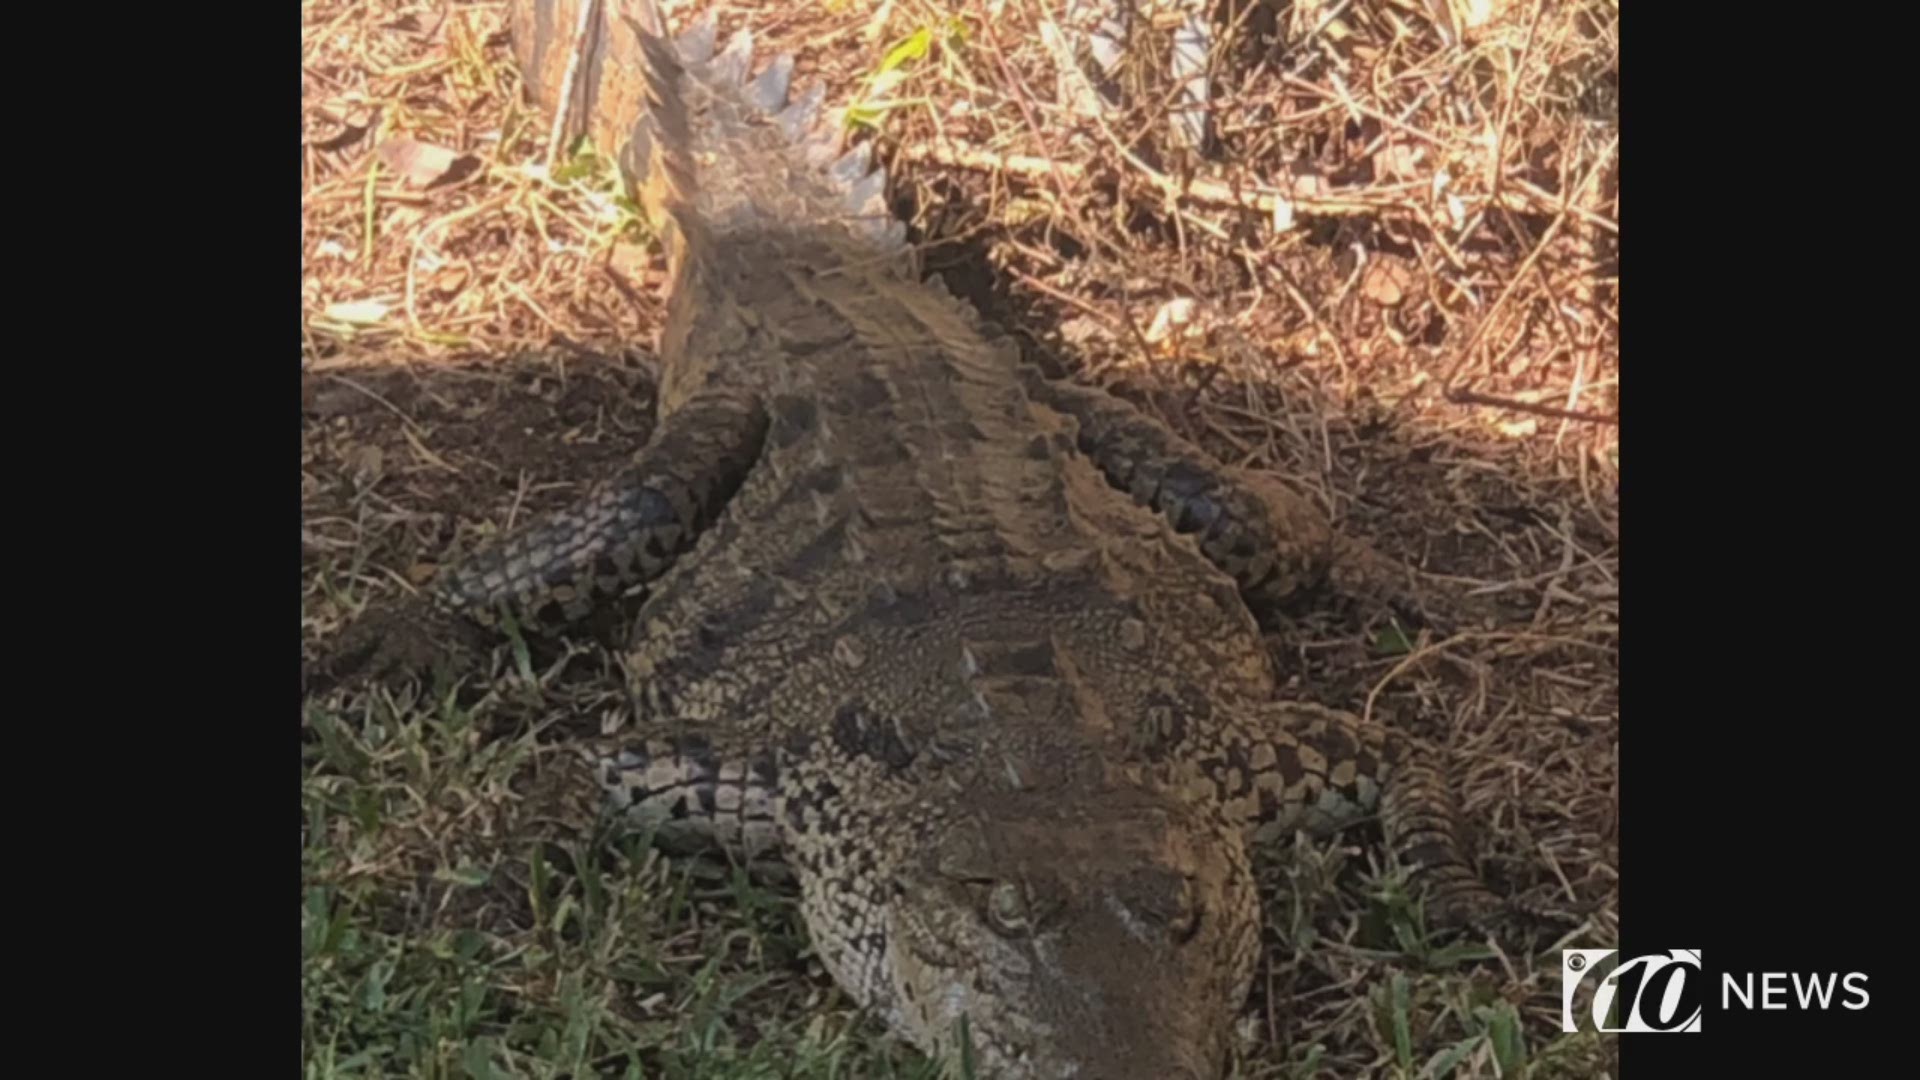 Yesterday, the Sarasota County Sheriff's Office says an "extremely rare" American crocodile showed up in a front yard.